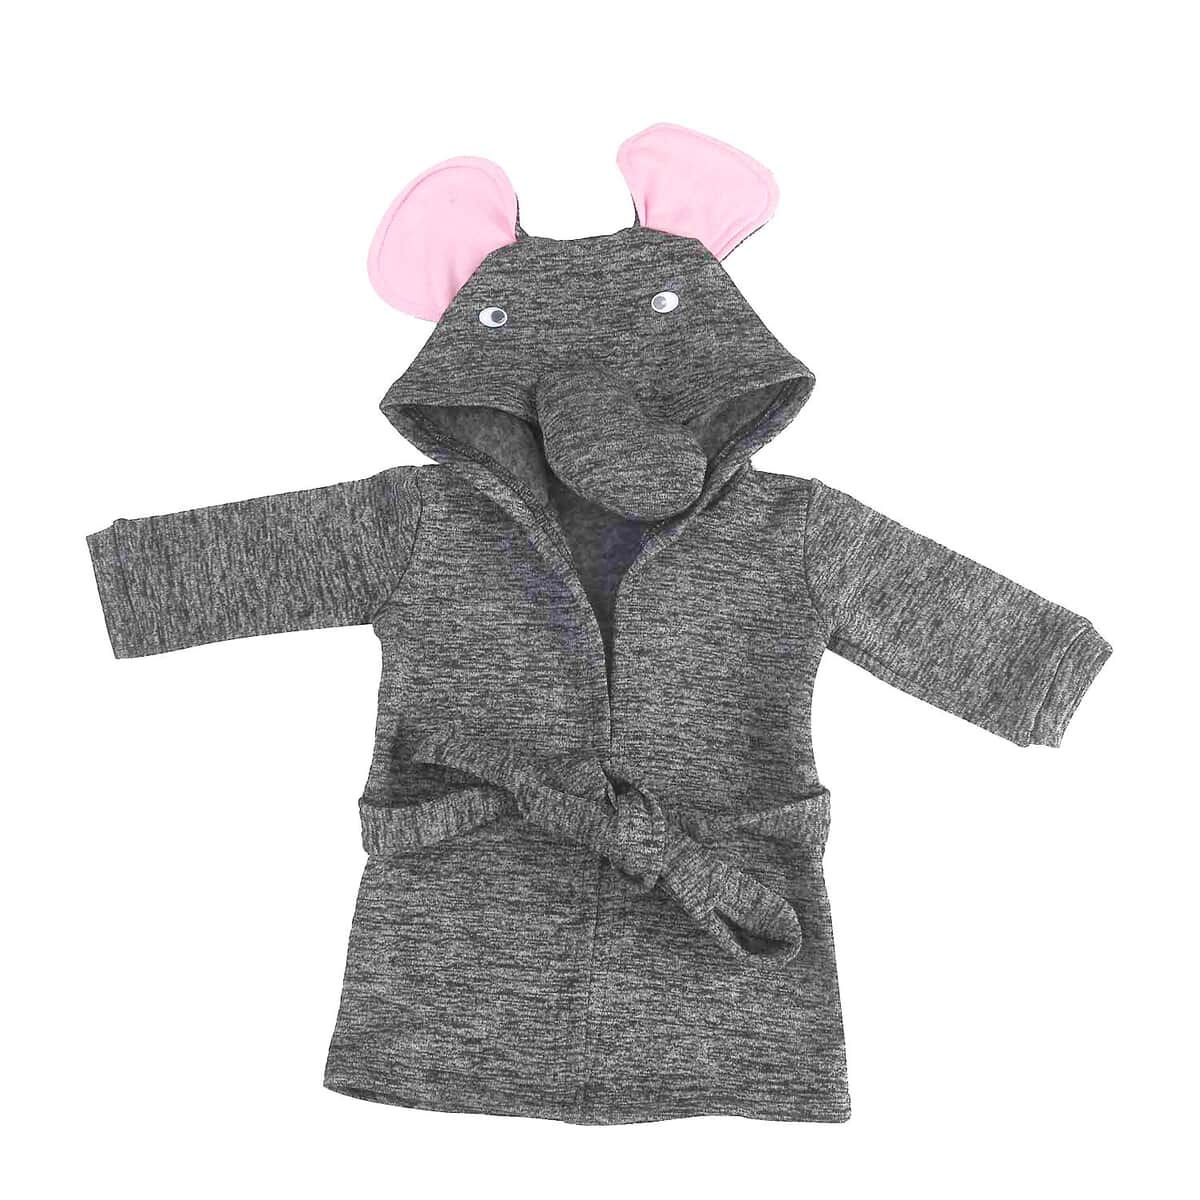 Dark Grey and Pink Elephant Pattern 100% Cotton Knitted Soft Hooded Toddler Baby Bath Towel (26"x11.5") image number 0